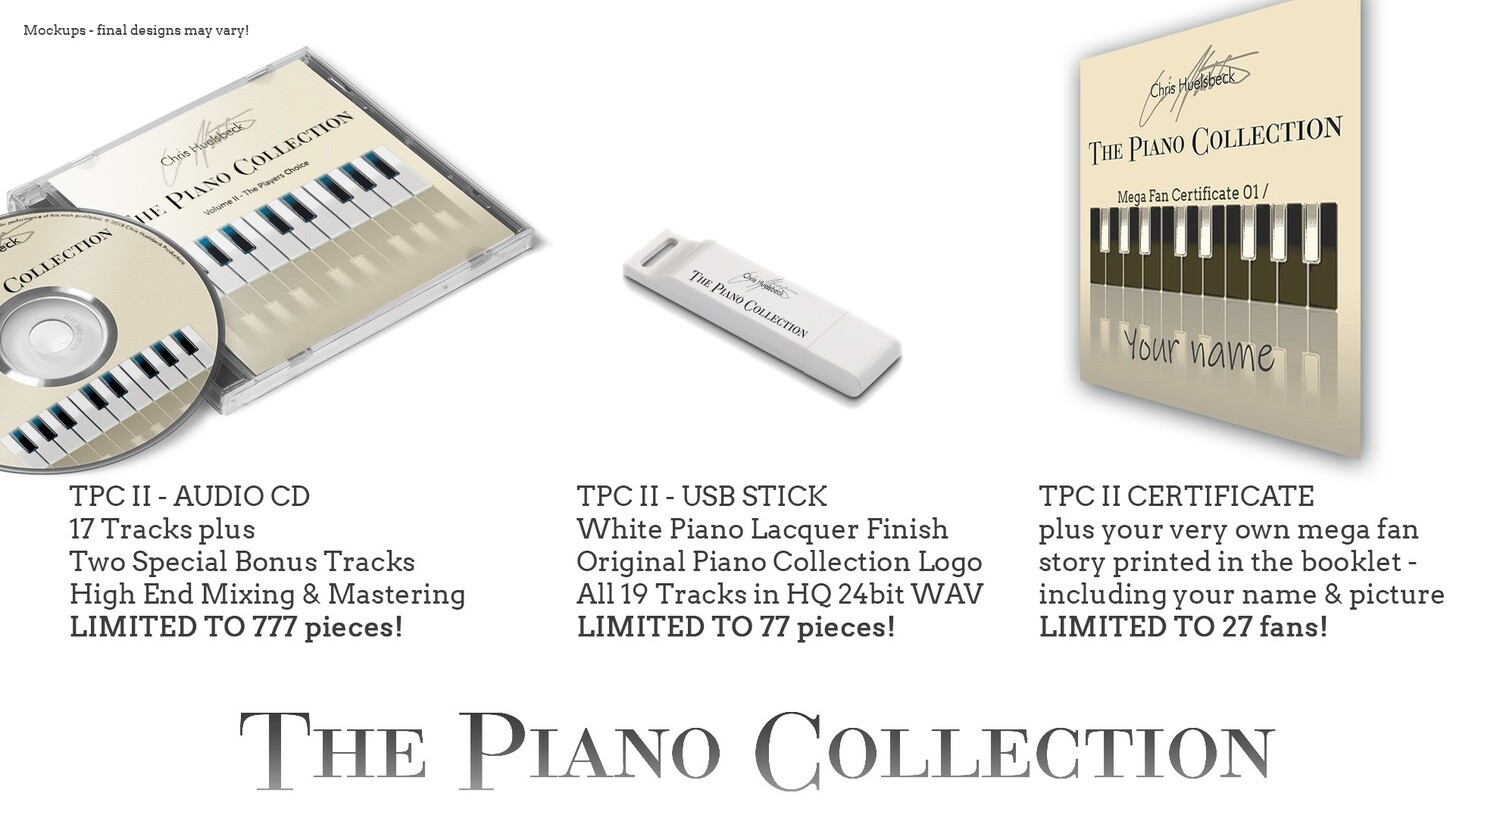 Chris Huelsbeck The Piano Collection - Volume II: The Players Choice AUDIO CD - VERSANDKOSTENFREI / FREE SHIPPING